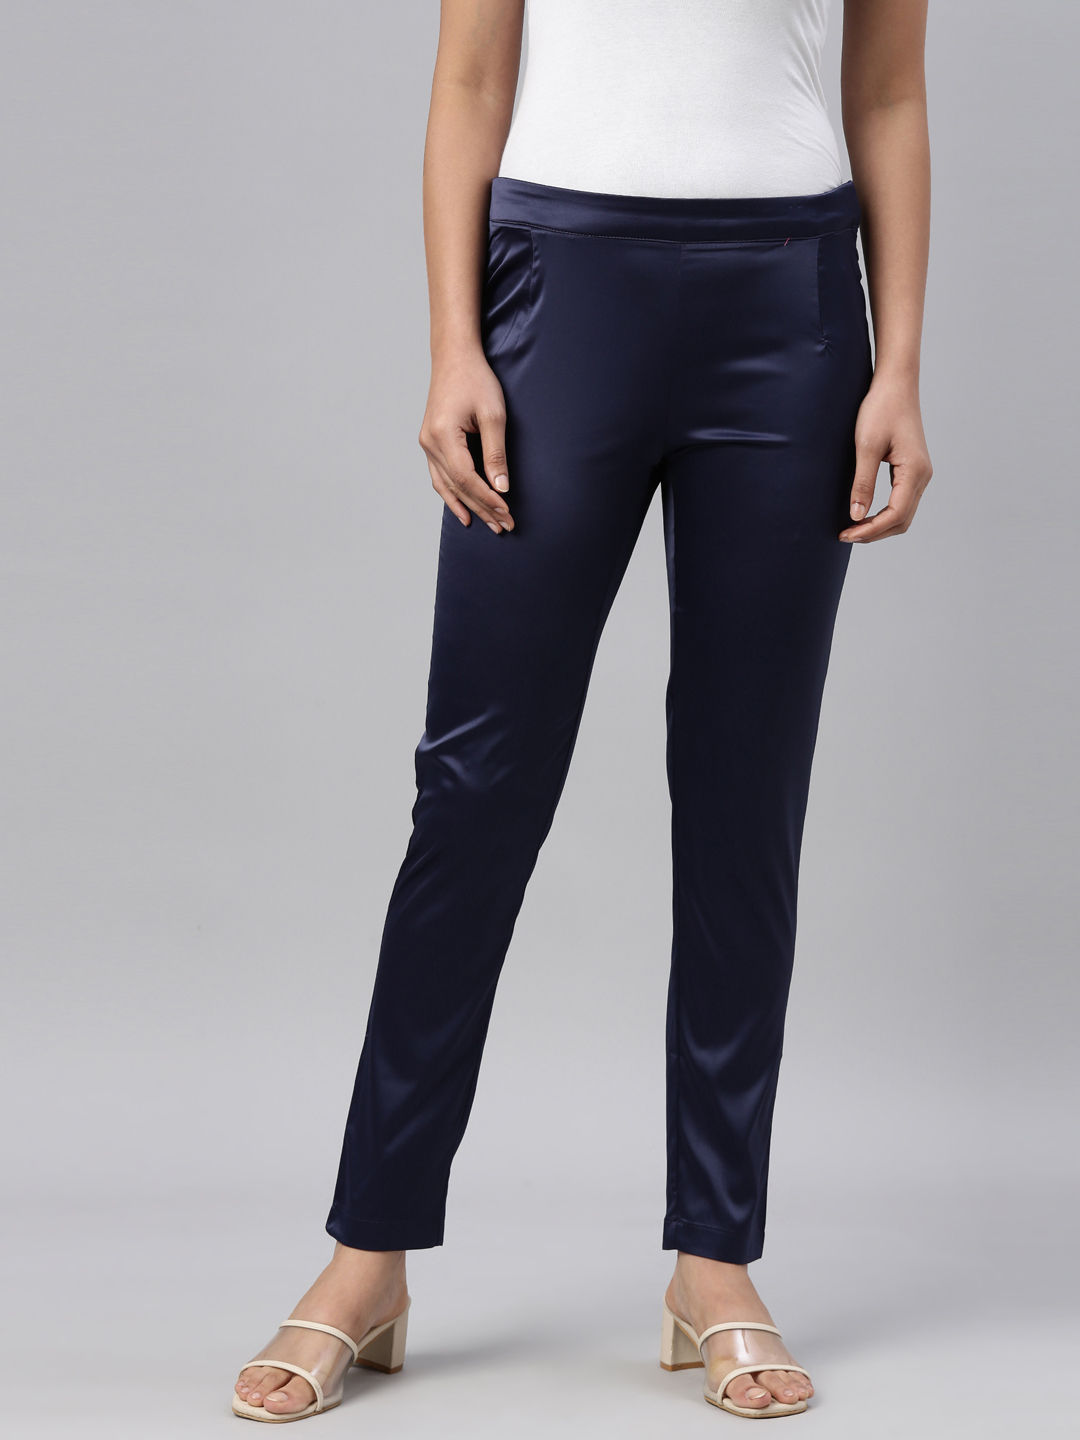 Elegant Navy Blue Trousers Outfits For Ladies | Blue trousers outfit, Blue  pants outfit, Navy blue pants outfit